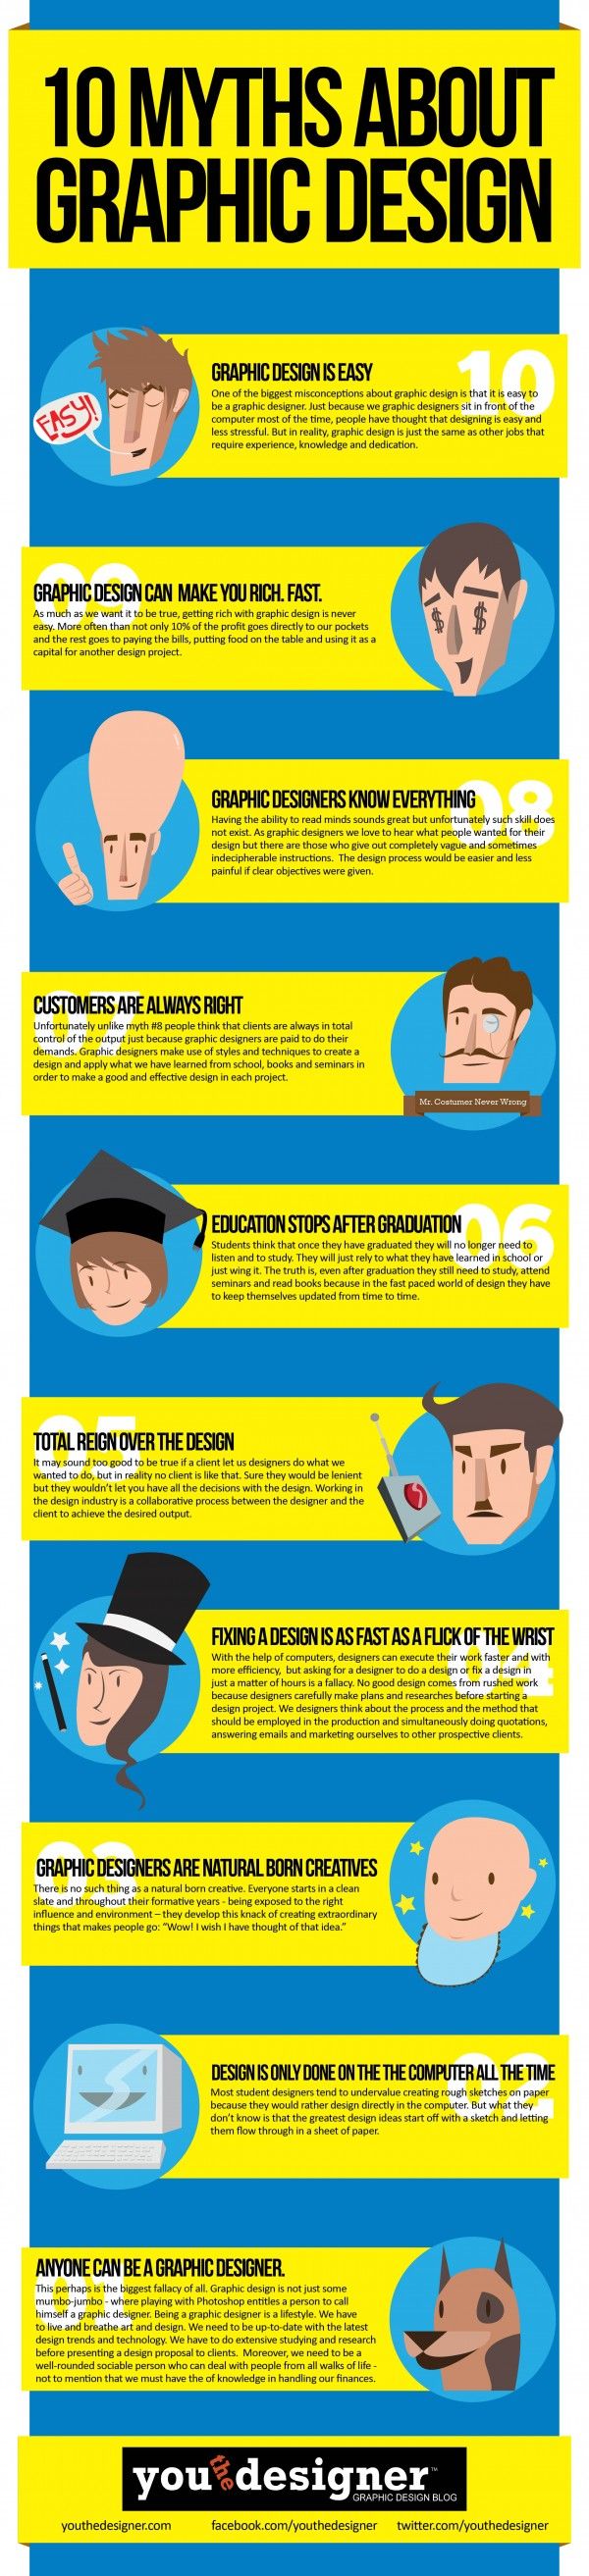 Top 10 myths about graphic design | Creative Bloq